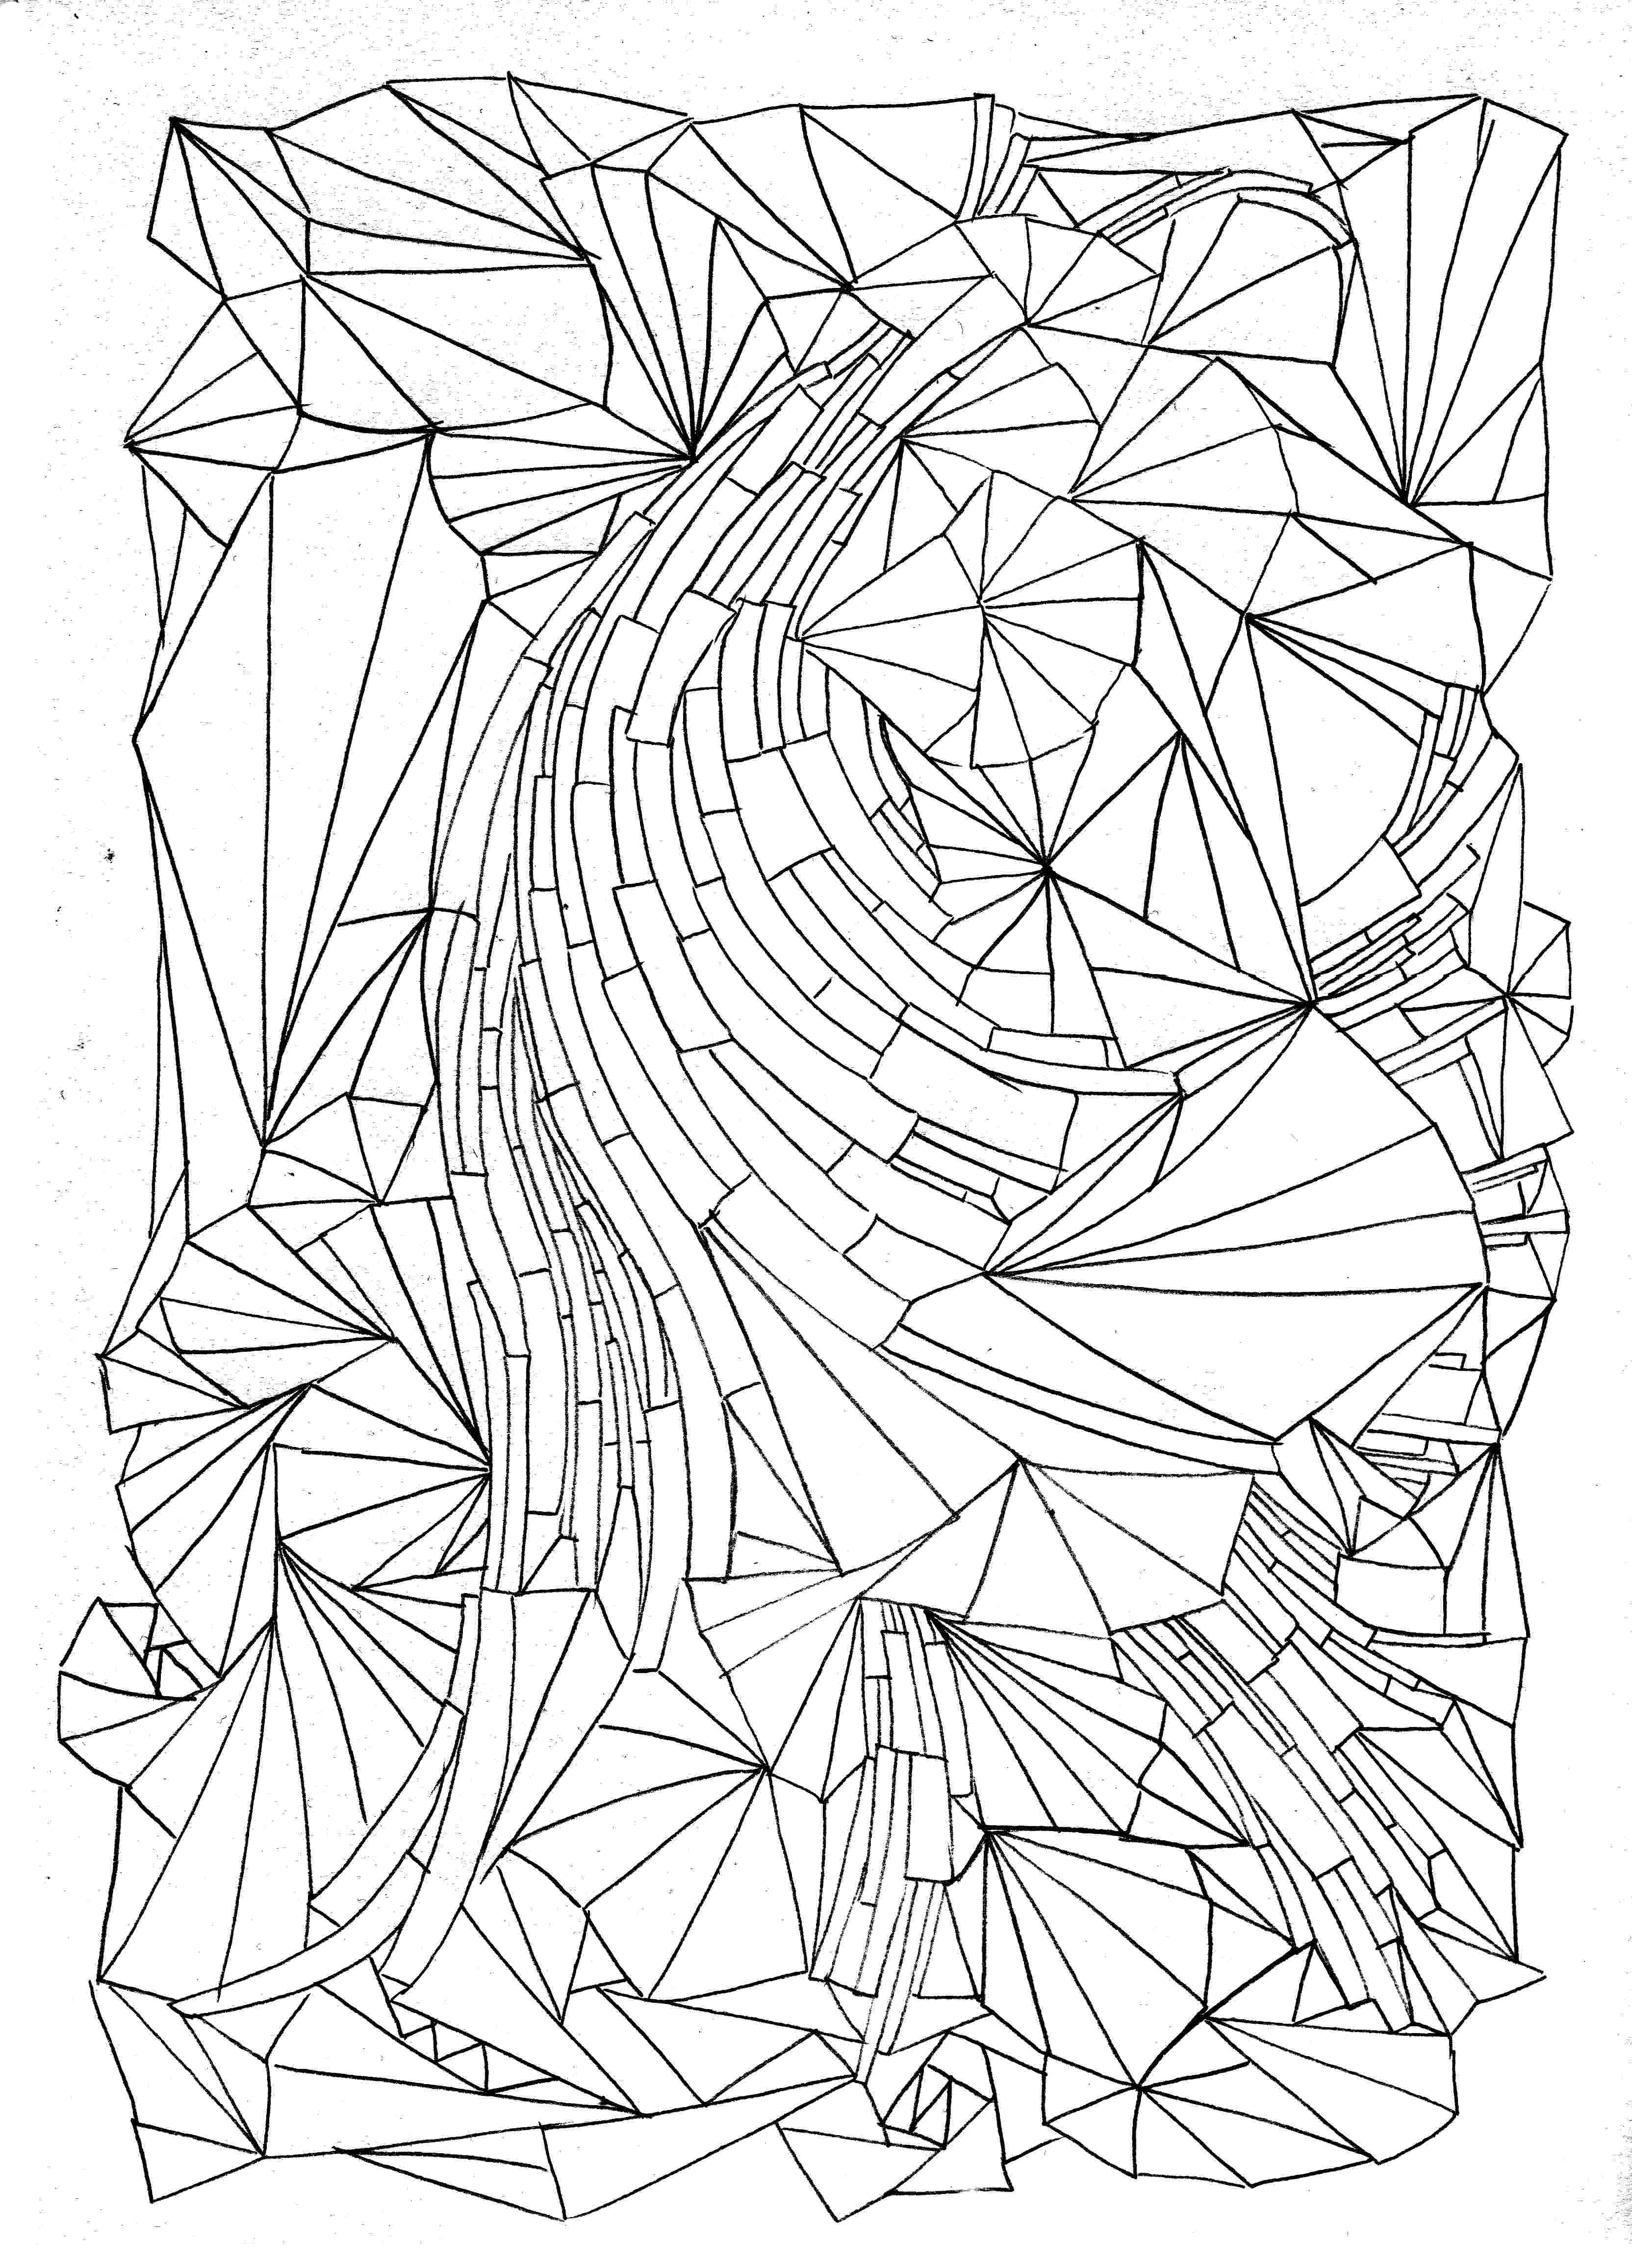 coloring patterns colouring designs thelinoprinter coloring patterns 